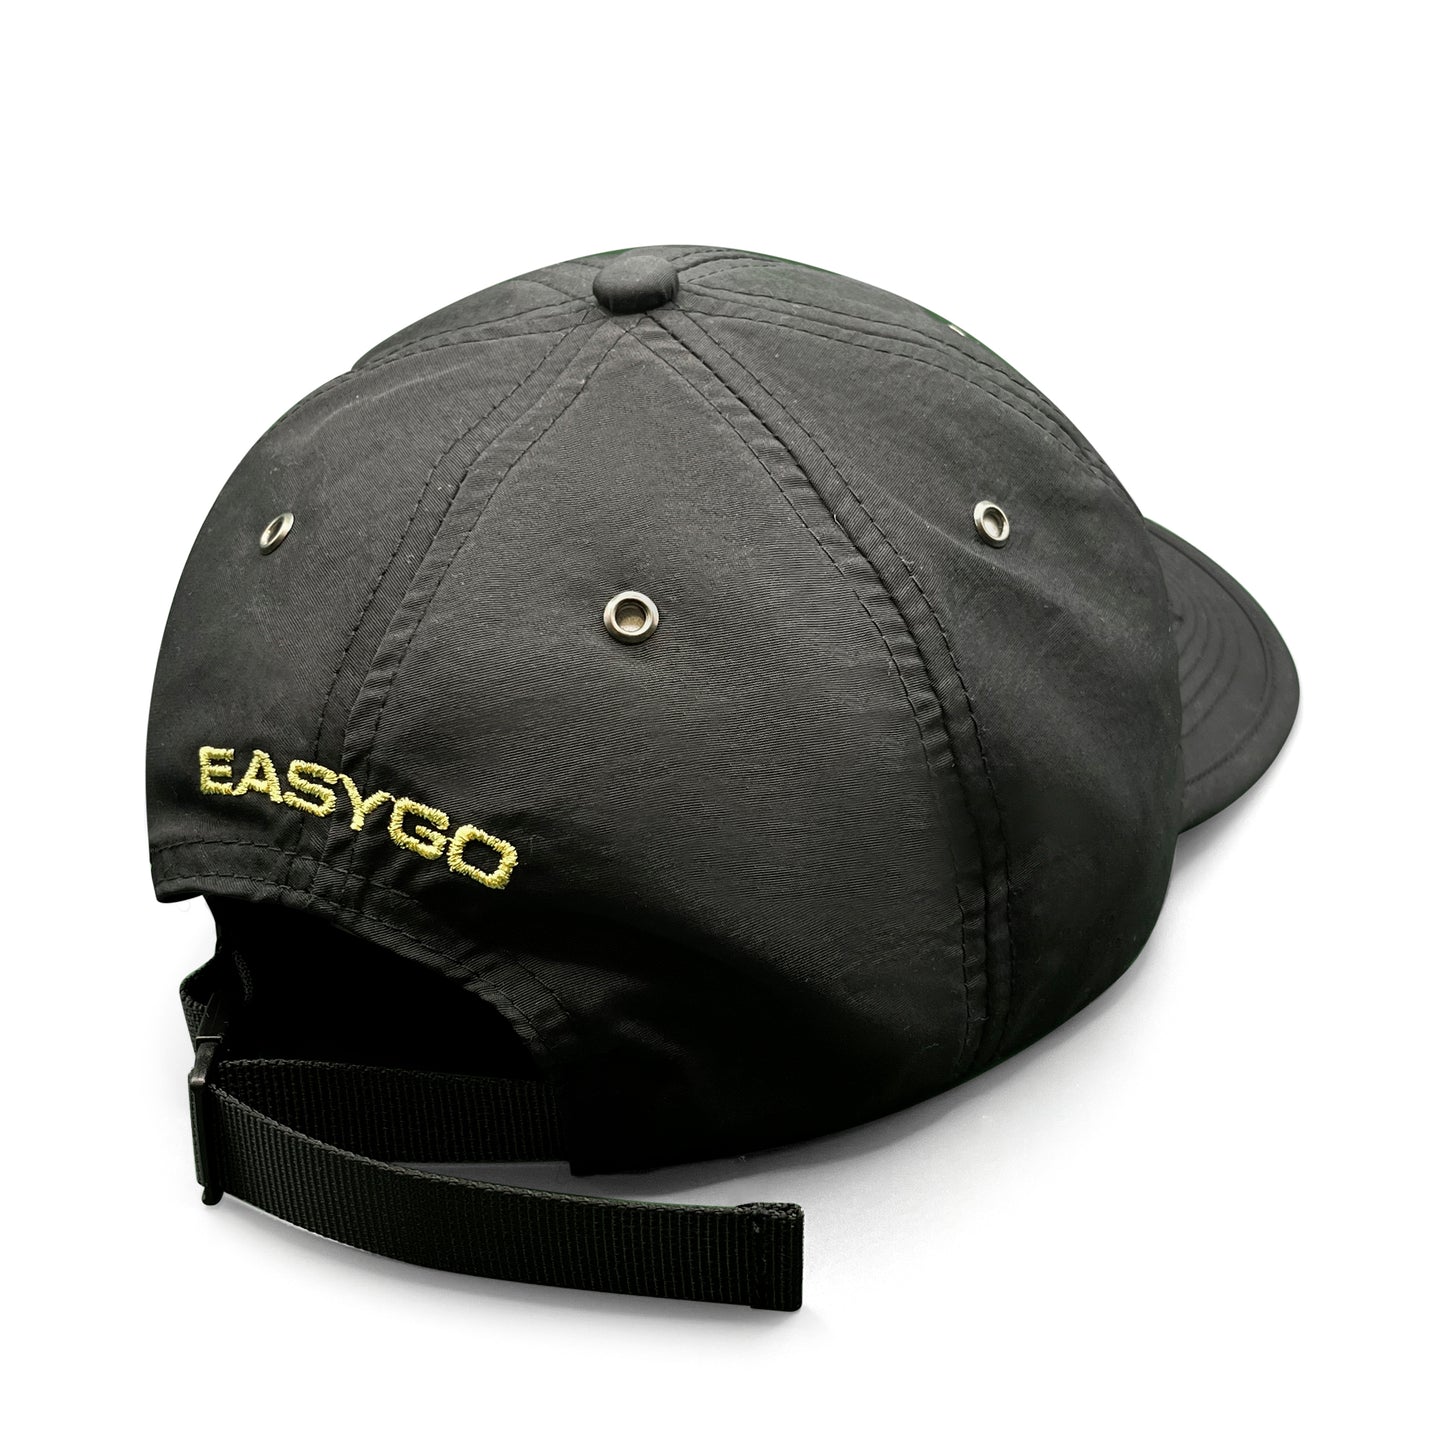 EasyGo "Safety Meeting" 6 Panel Cap